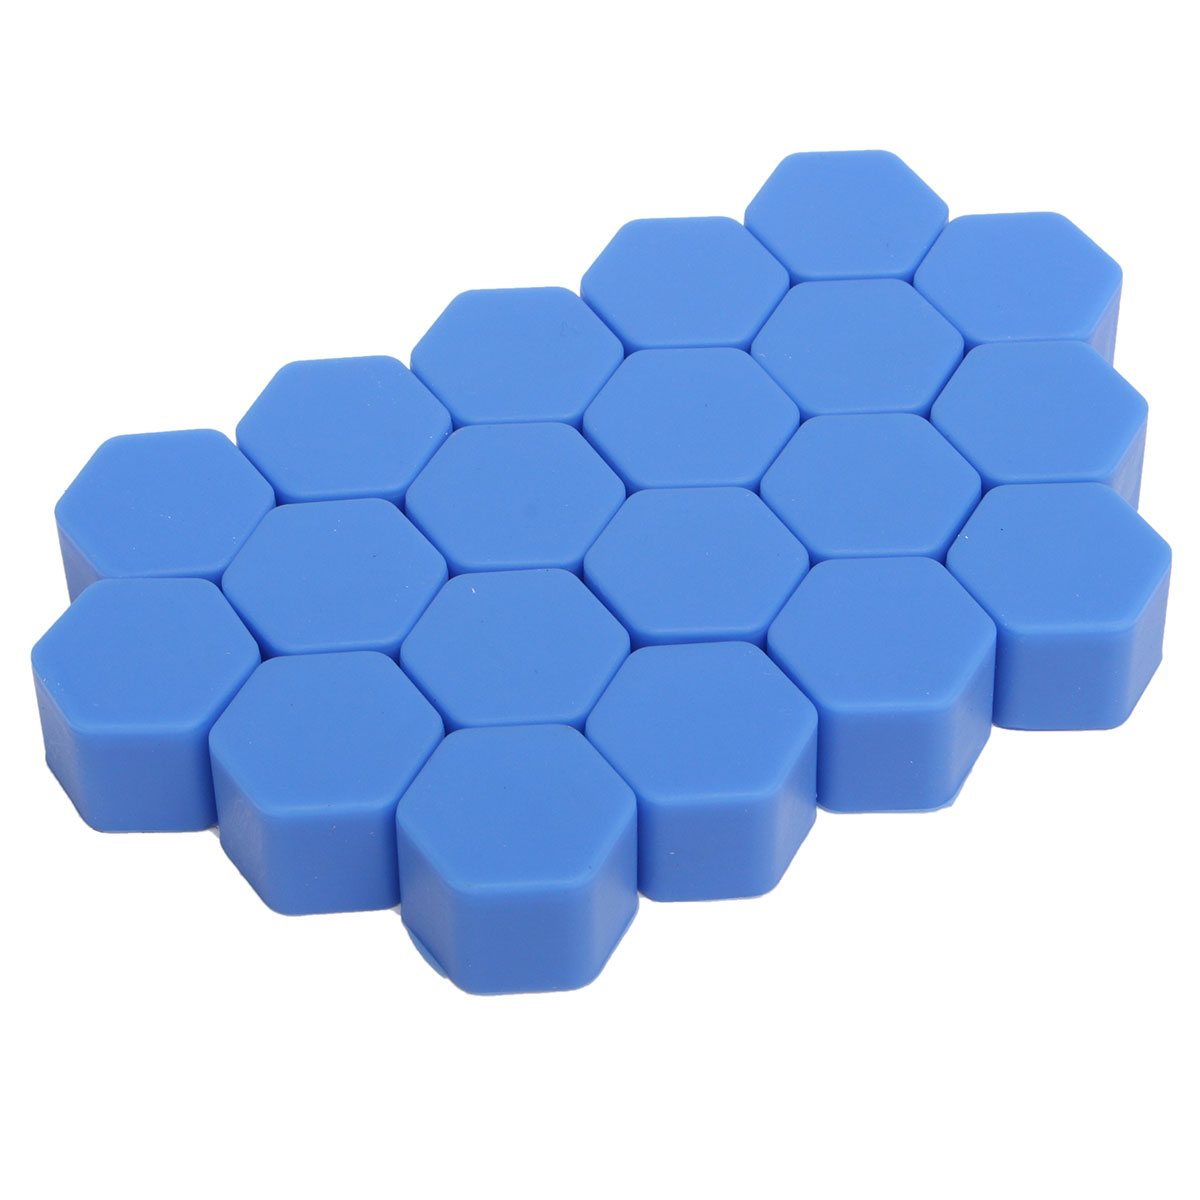 20PCS-19mm-Auto-Car-Silicone-Wheel-Nuts-Hub-Covers-Screw-Dust-Protective-Caps-1070127